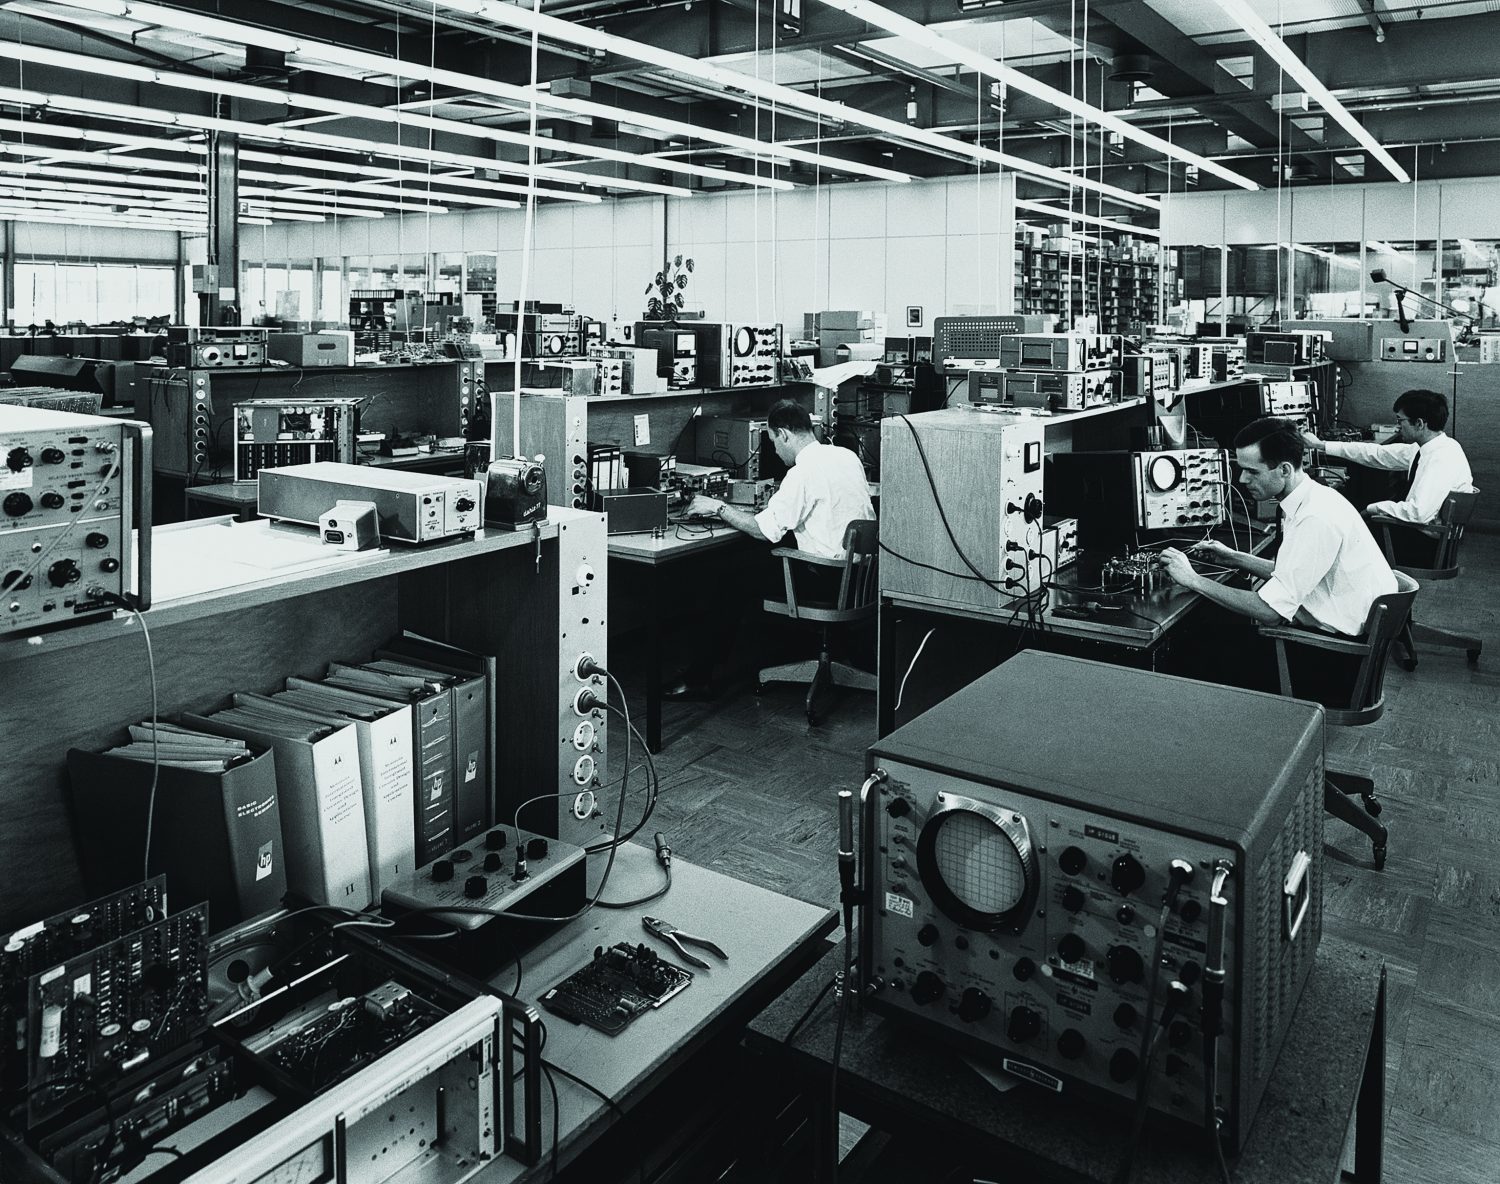 Hewlett-Packard production facility in Germany with open spaces and individual workstations.